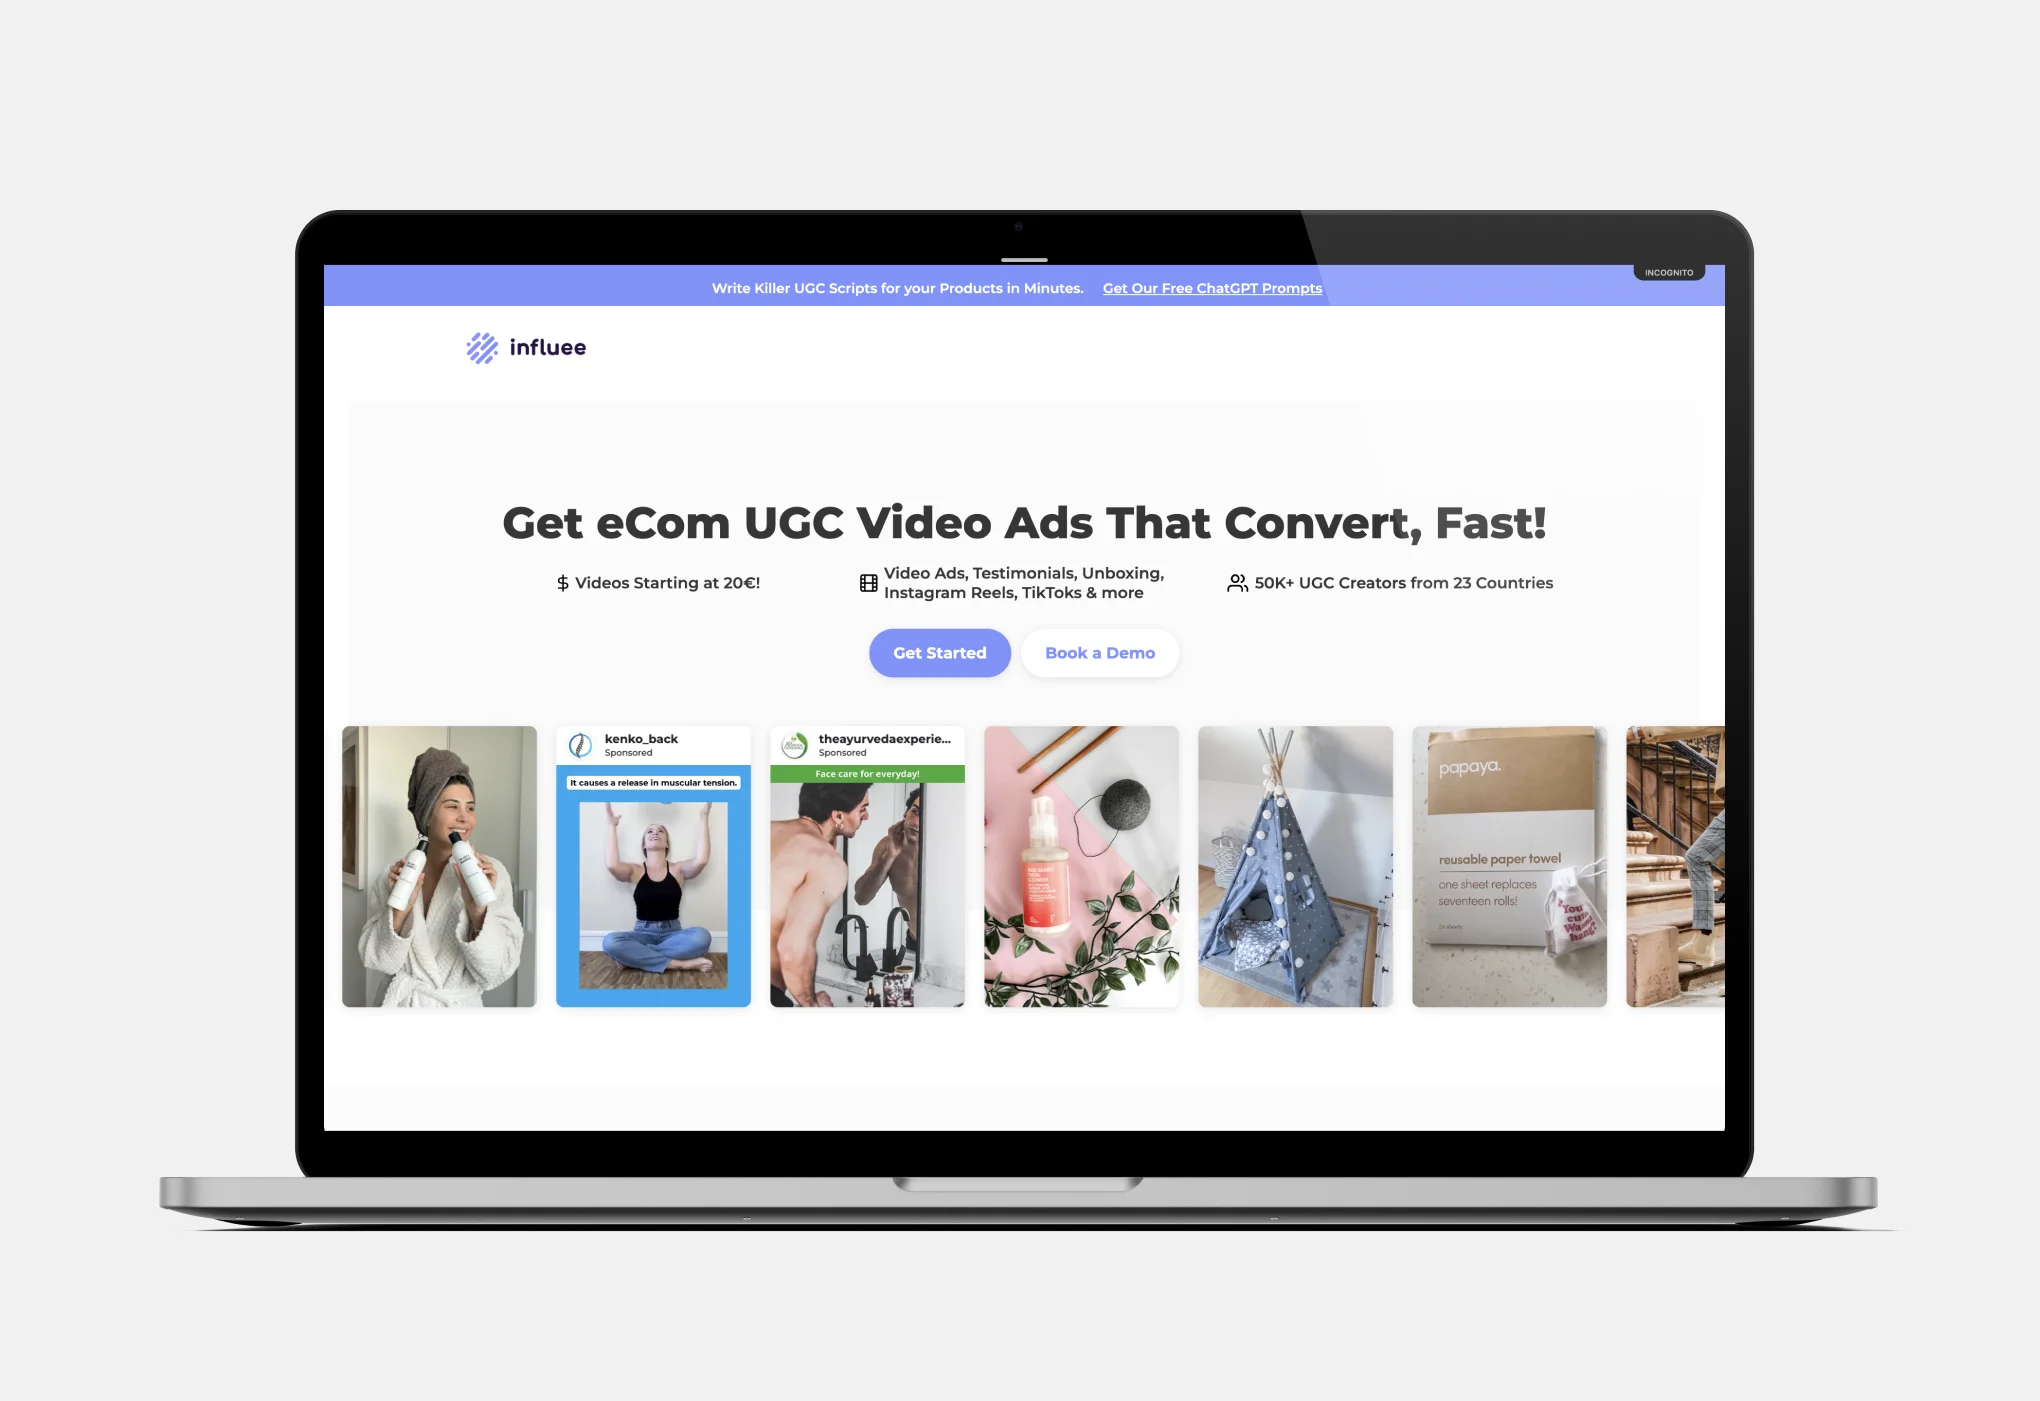 The landing page of UGC platform Influee with the tagline: Get eCom UGC video ads that convert, fast!